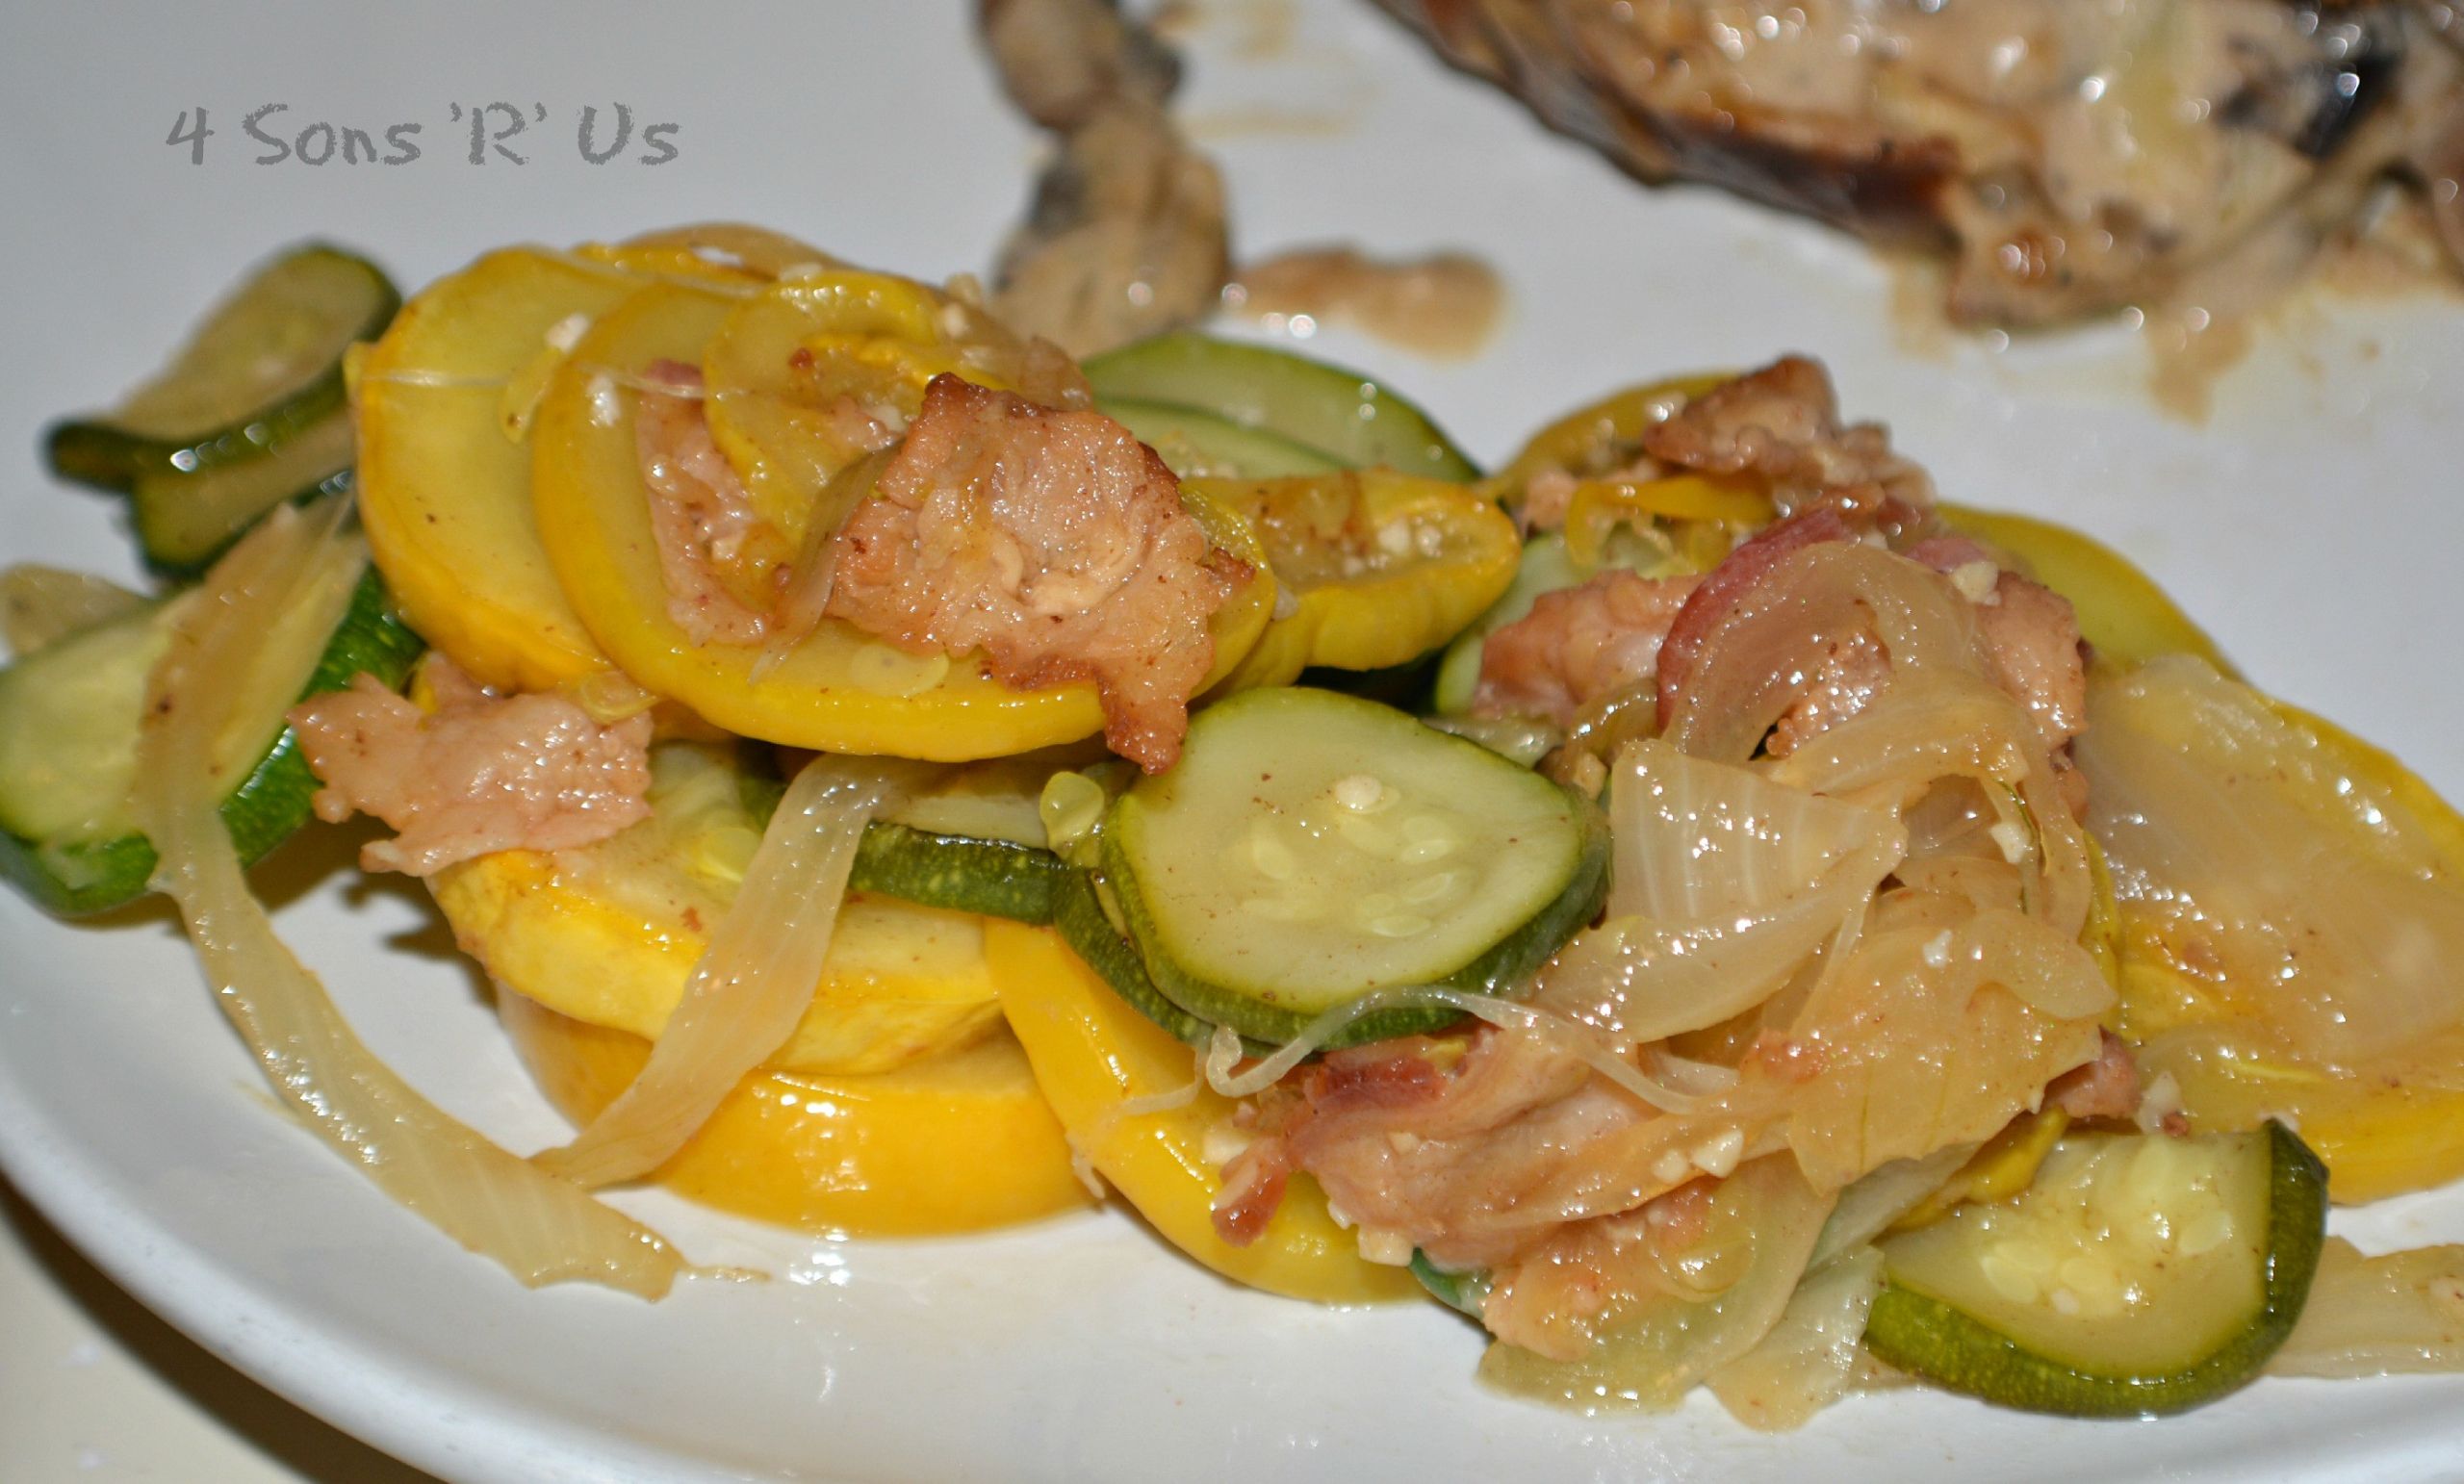 Sauteed Summer Squash
 Sauteed Summer Squash with Bacon & ions 4 Sons R Us